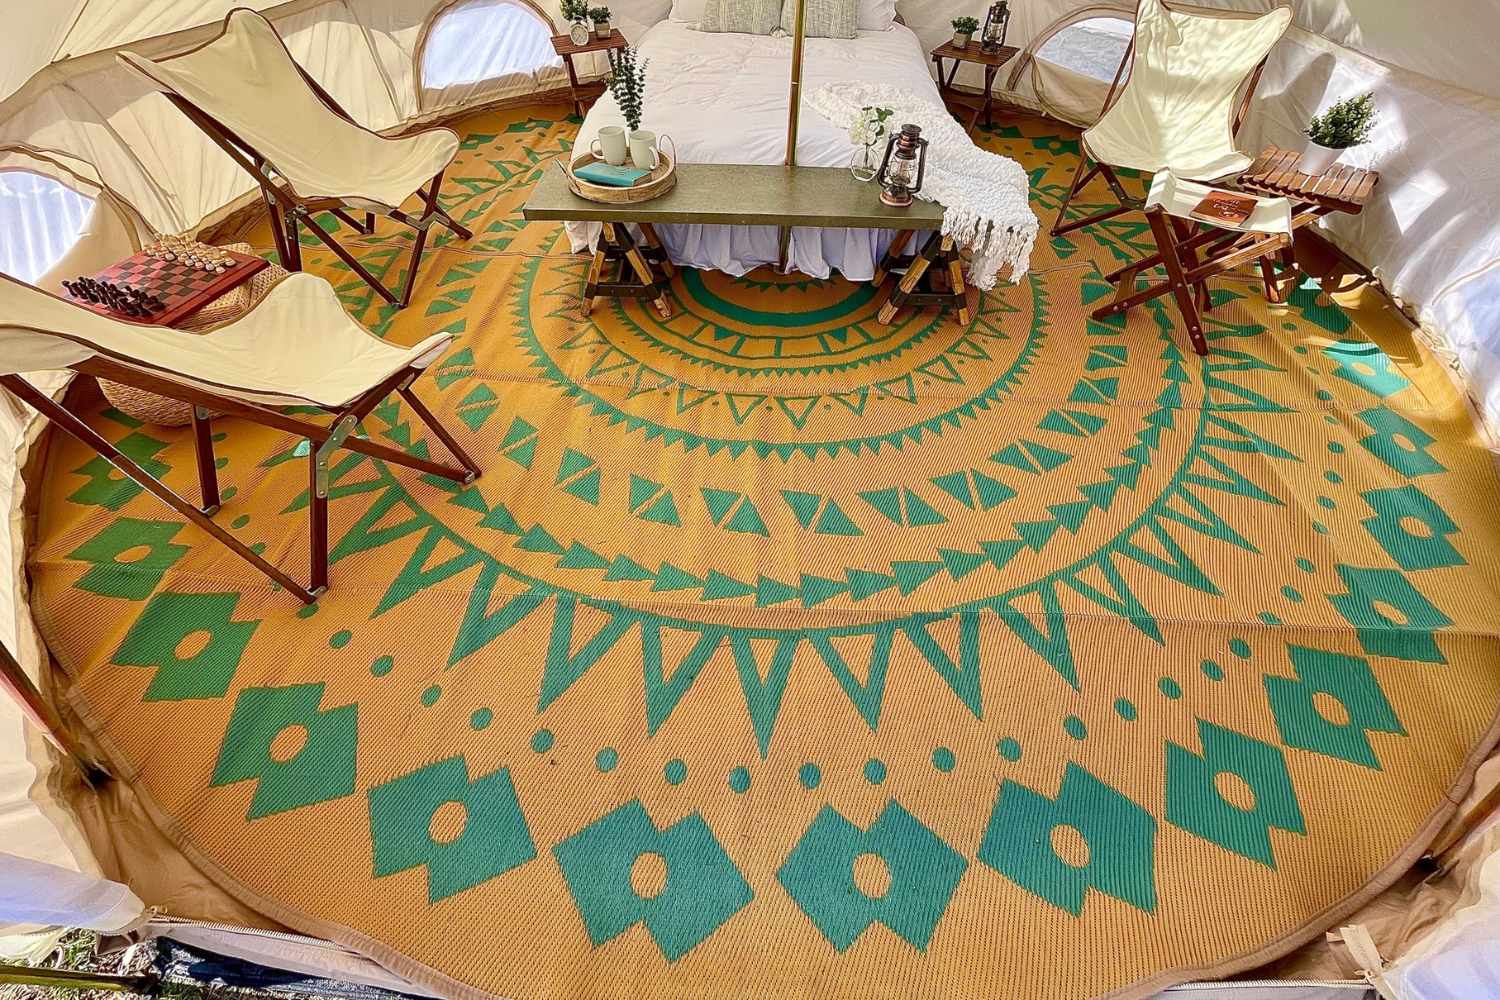 LIFE IN TENTS Bell Tents 5 Meter / 16ft Diameter Life In Tent Boho Style Bell Tent Floor Matting Cover | 16' (5M)- LITBSBTFMC